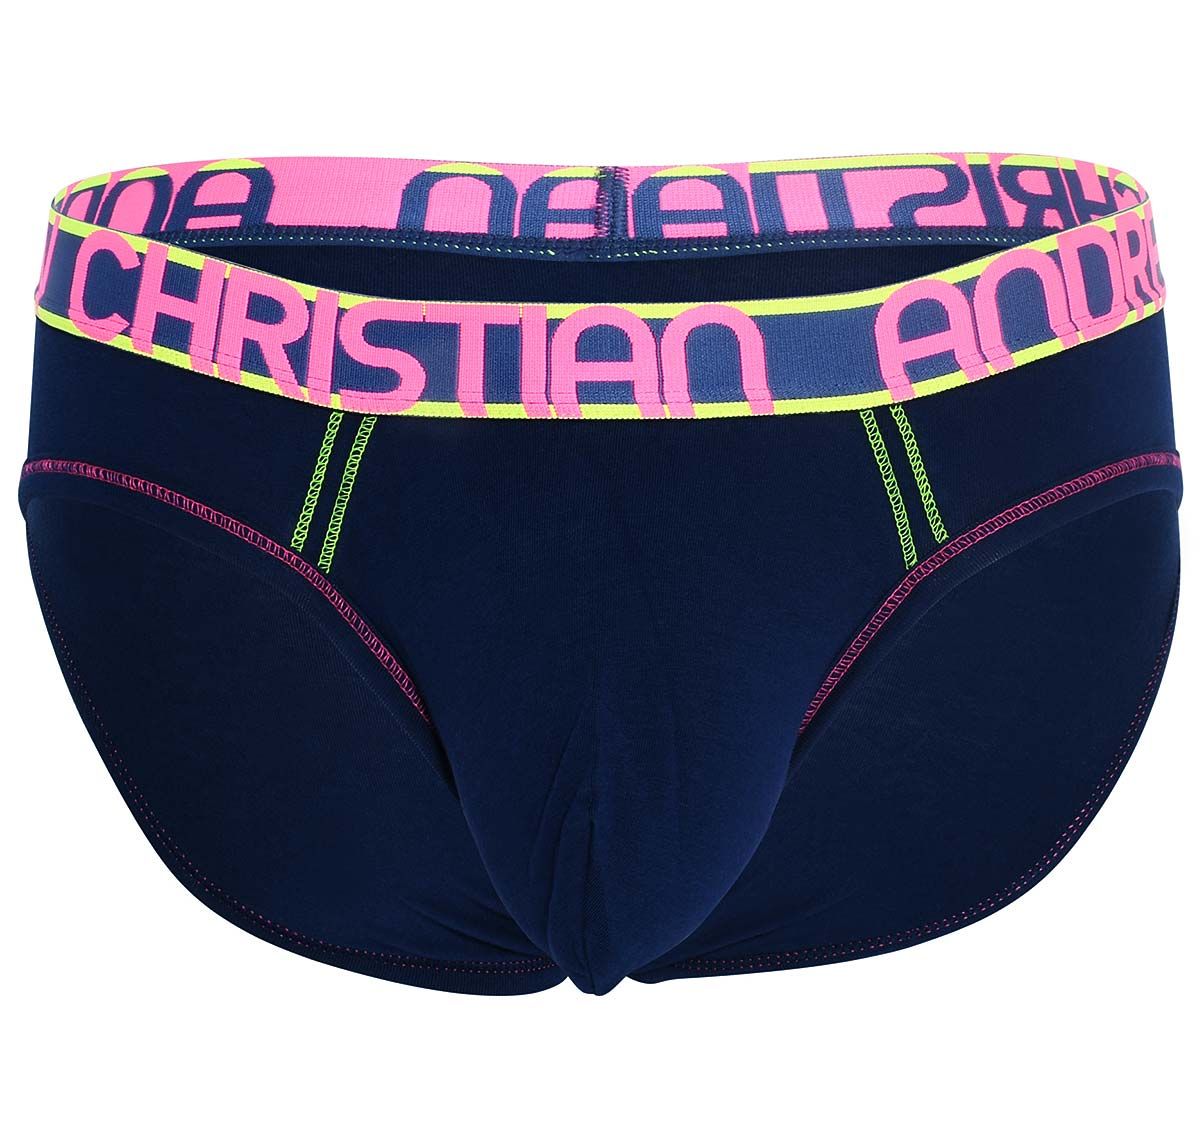 Andrew Christian Brief ALMOST NAKED COTTON BRIEF 92182, bleu marine